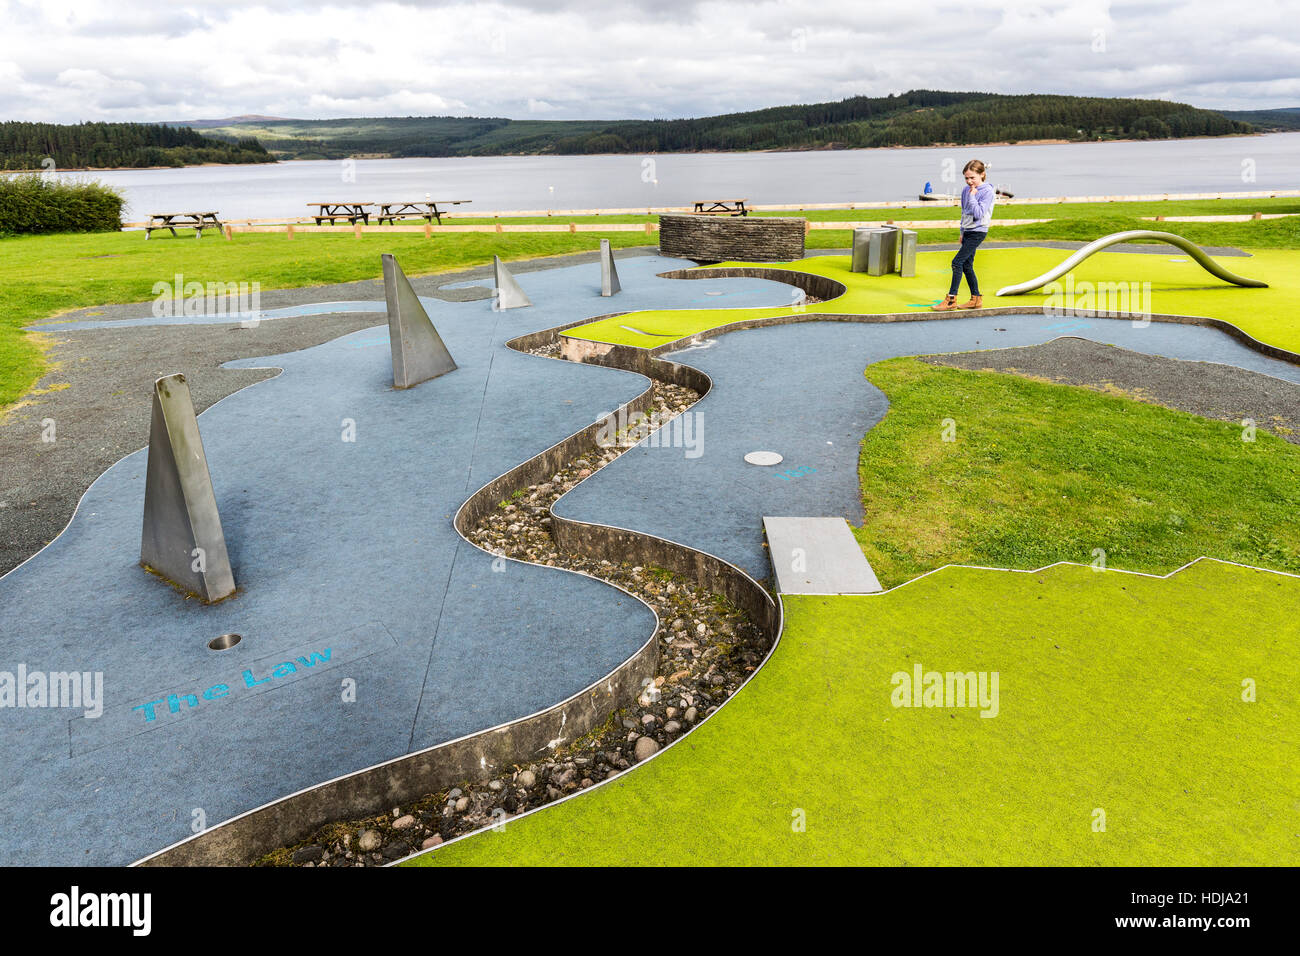 Crazy golf course with local landmarks represented for ach hole, Kielder reservoir, Northumberland, England, UK Stock Photo